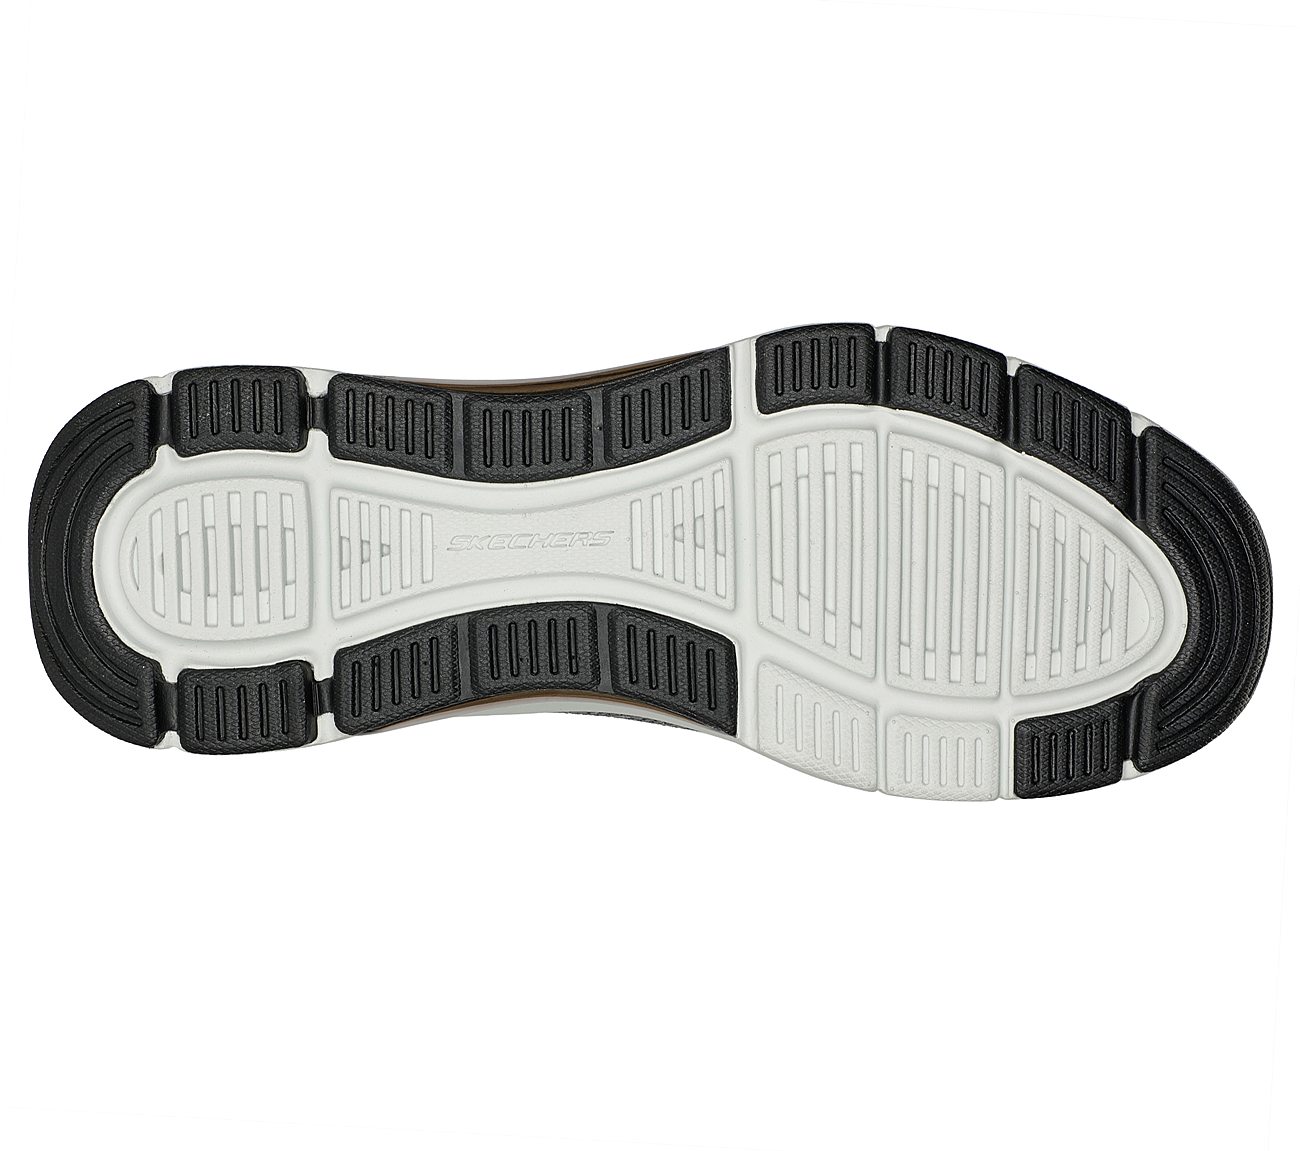 SKECH-AIR ARCH FIT, CCHARCOAL Footwear Bottom View